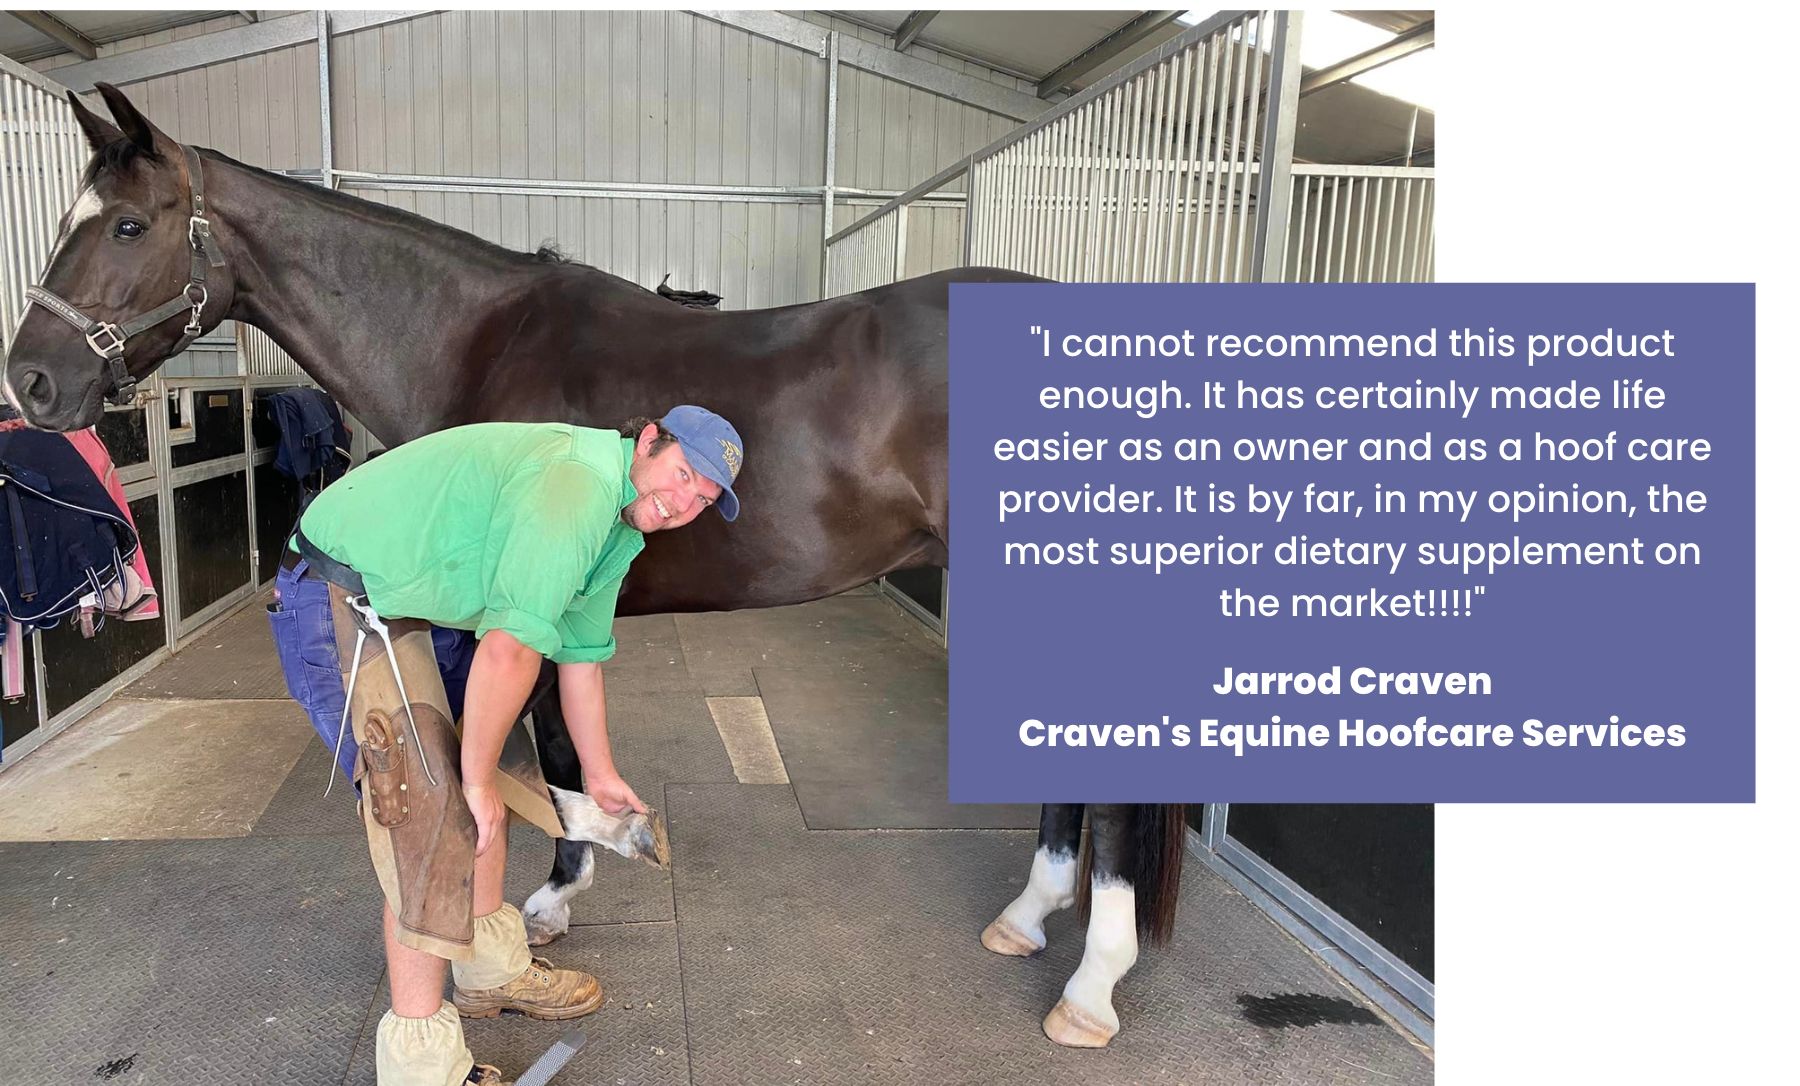 Jarrod Craven's Story: From Lameness to Hoof Care Expert